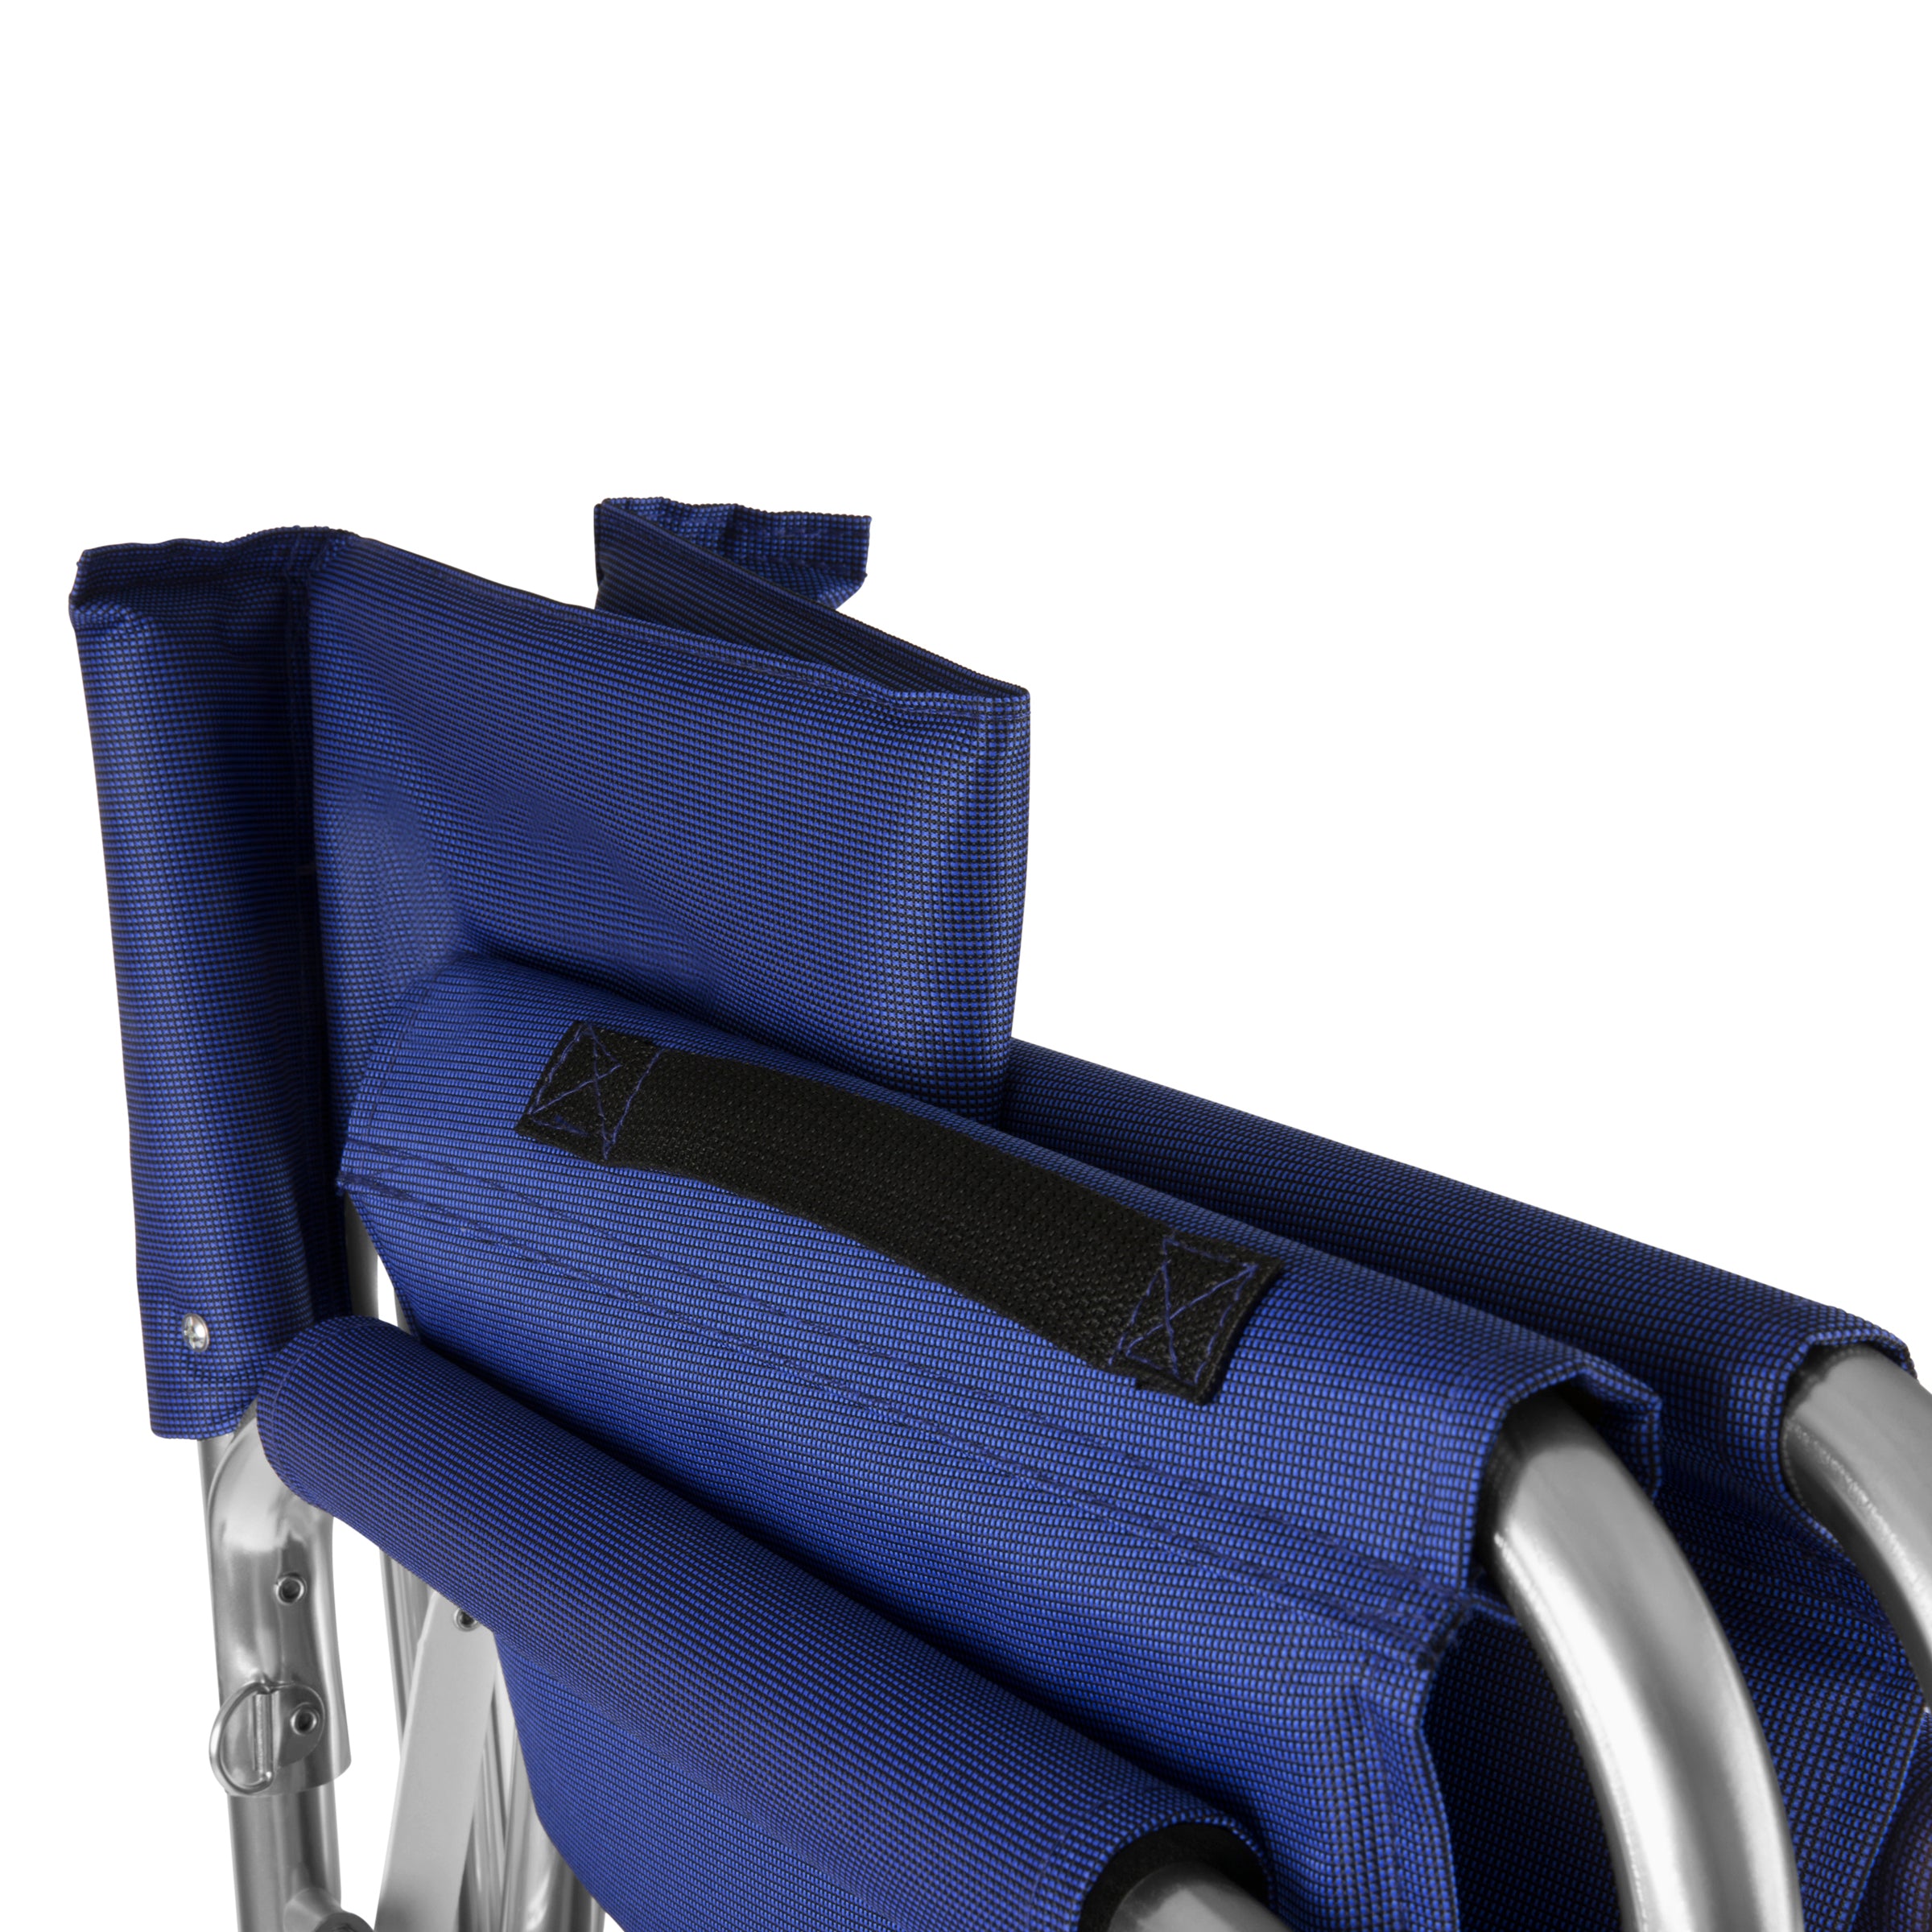 Seattle Mariners - Sports Chair